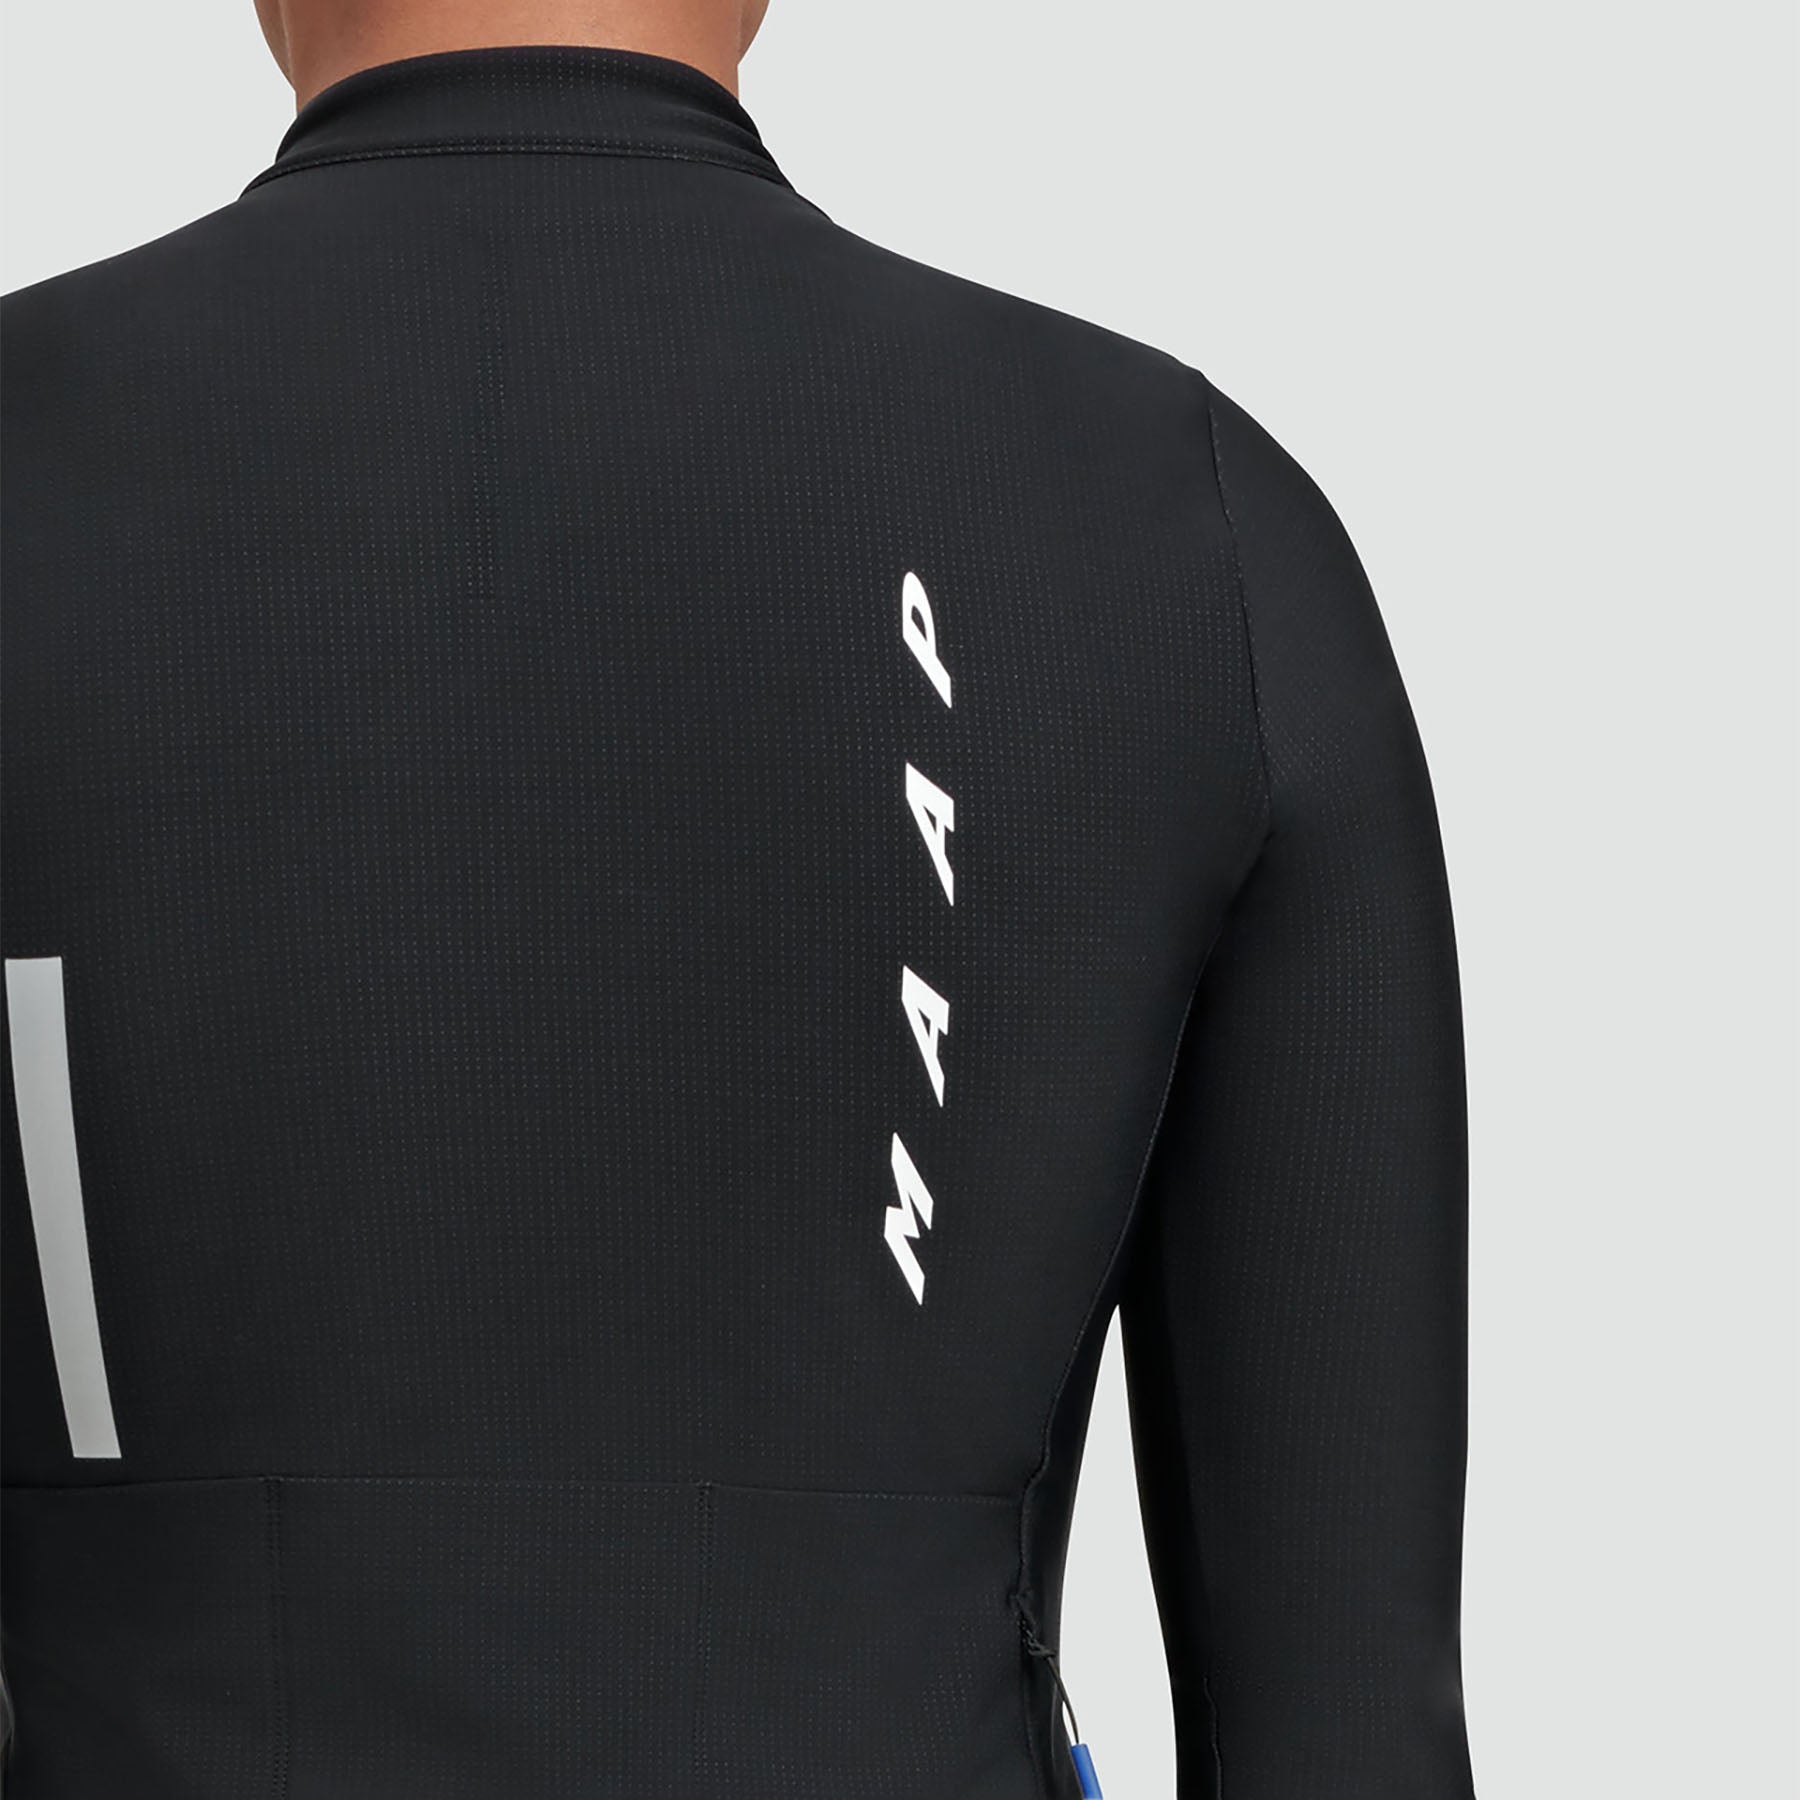 MAAP Evade Thermal LS Jersey 2.0 - Black – Le Club